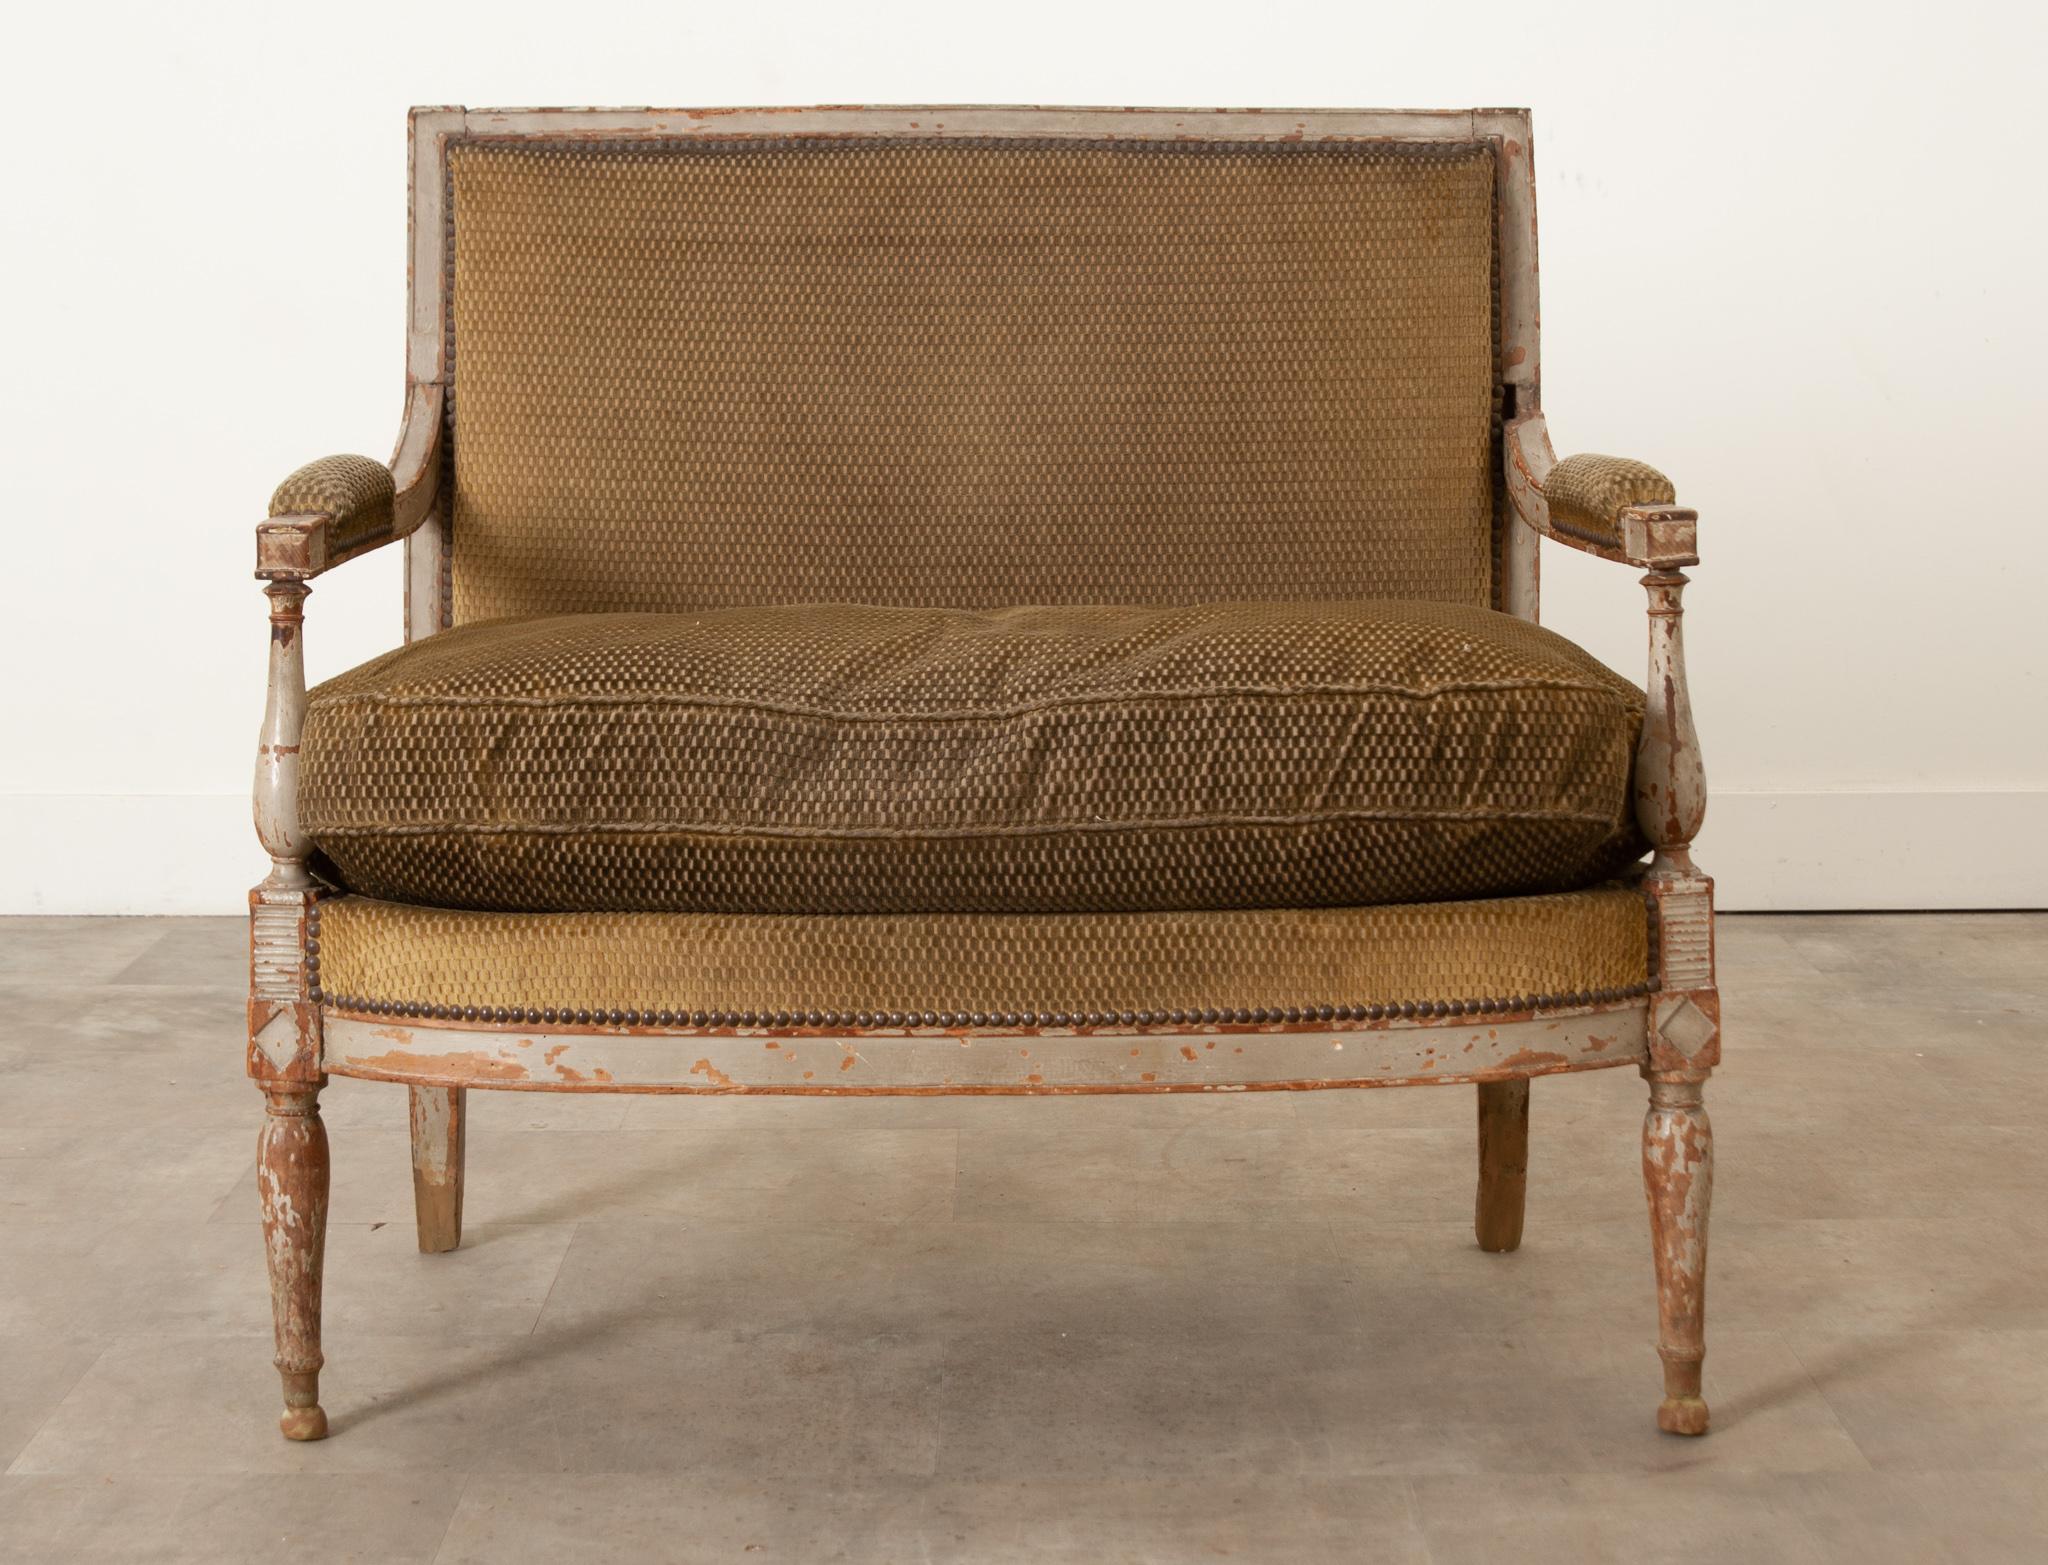 A French Directorie period petite settee is in wonderful antique condition. Hand carved and built in the early 1800’s, this settee is sturdy and is sure to bring a lot of character to your space. The carved wood frame boosts its original worn paint